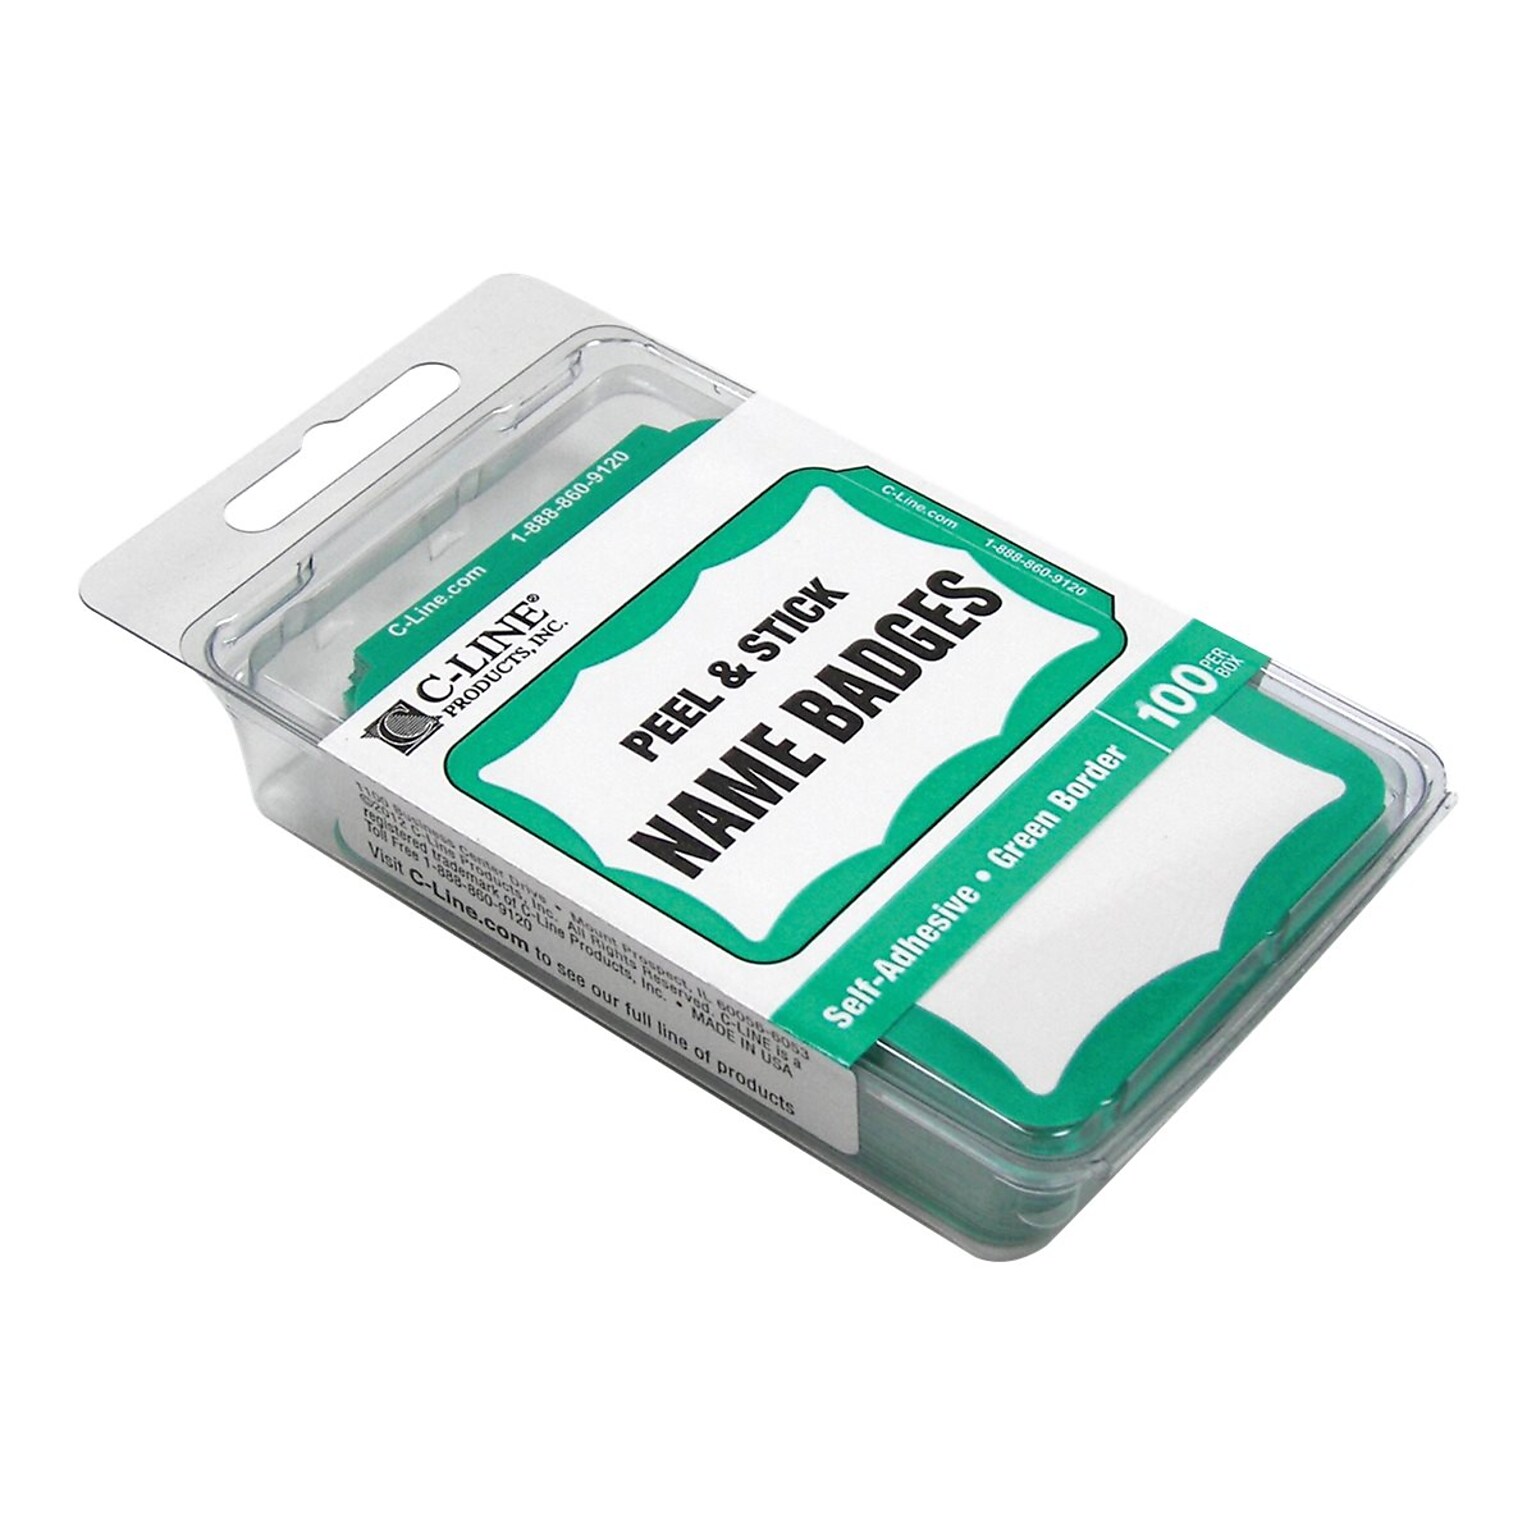 C-Line Sticker Name Tags/Labels, White with Green Border, 100/Box (92263)